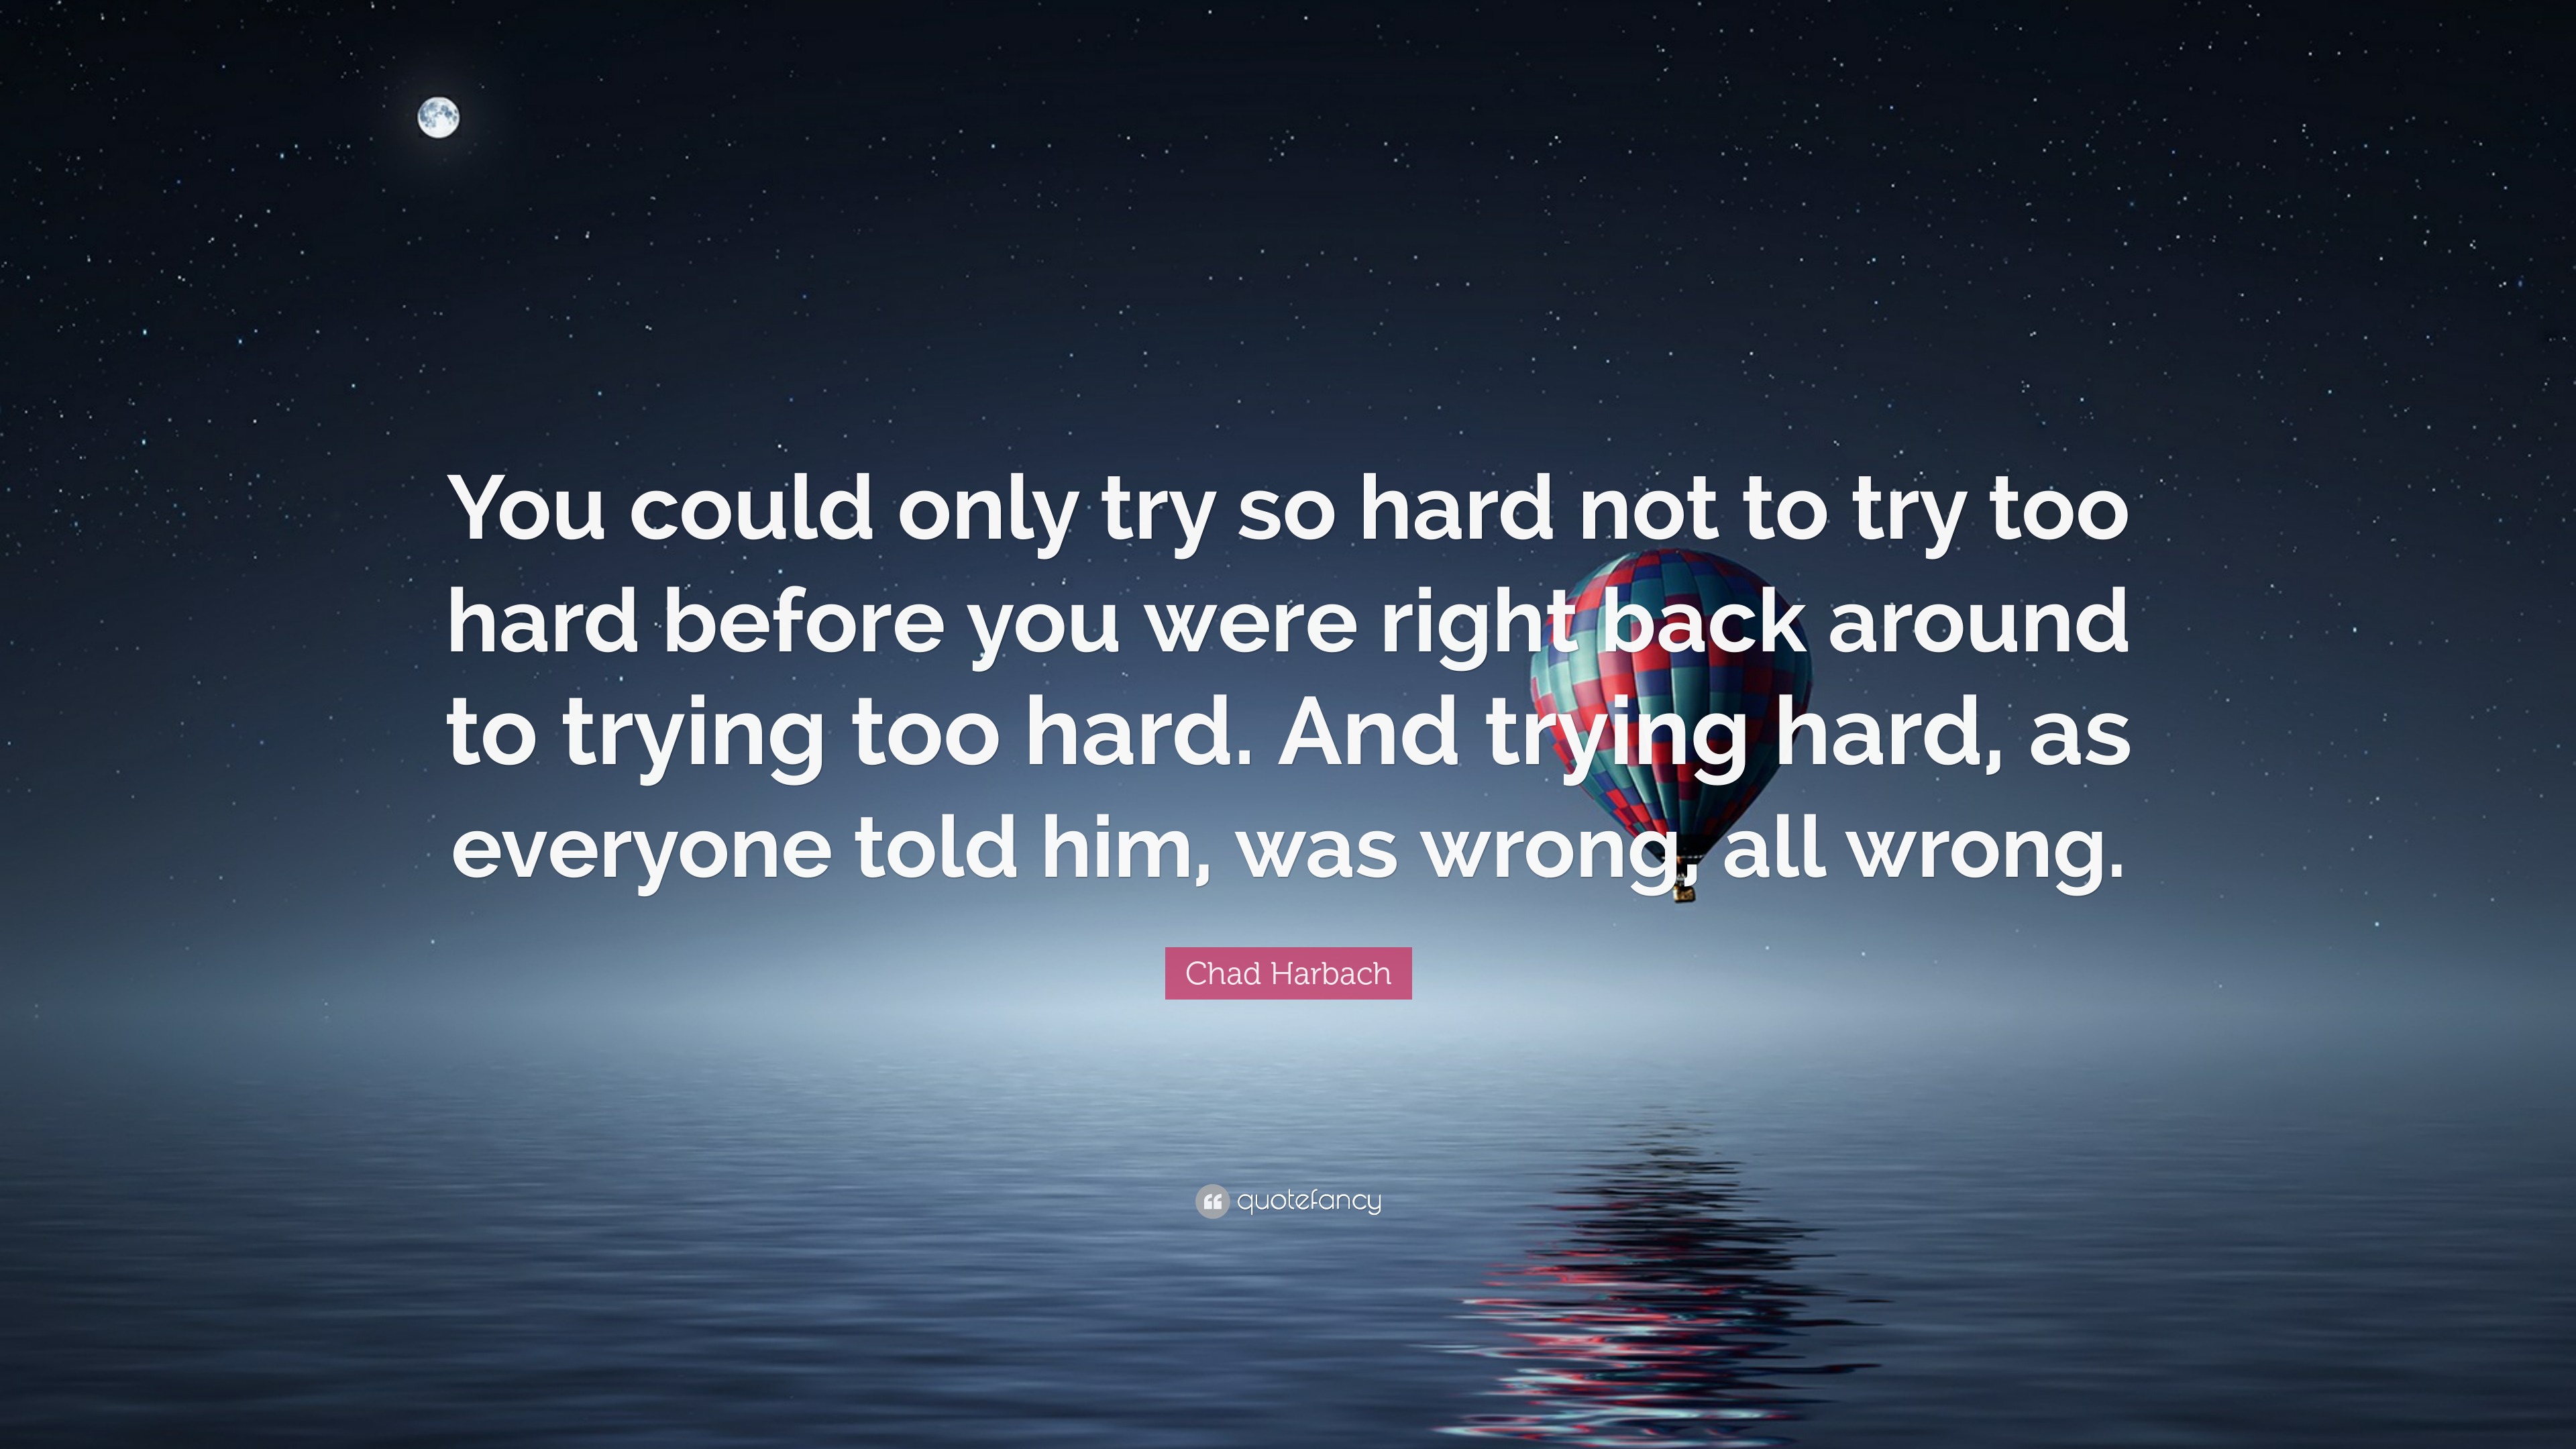 https://quotefancy.com/media/wallpaper/3840x2160/6524738-Chad-Harbach-Quote-You-could-only-try-so-hard-not-to-try-too-hard.jpg